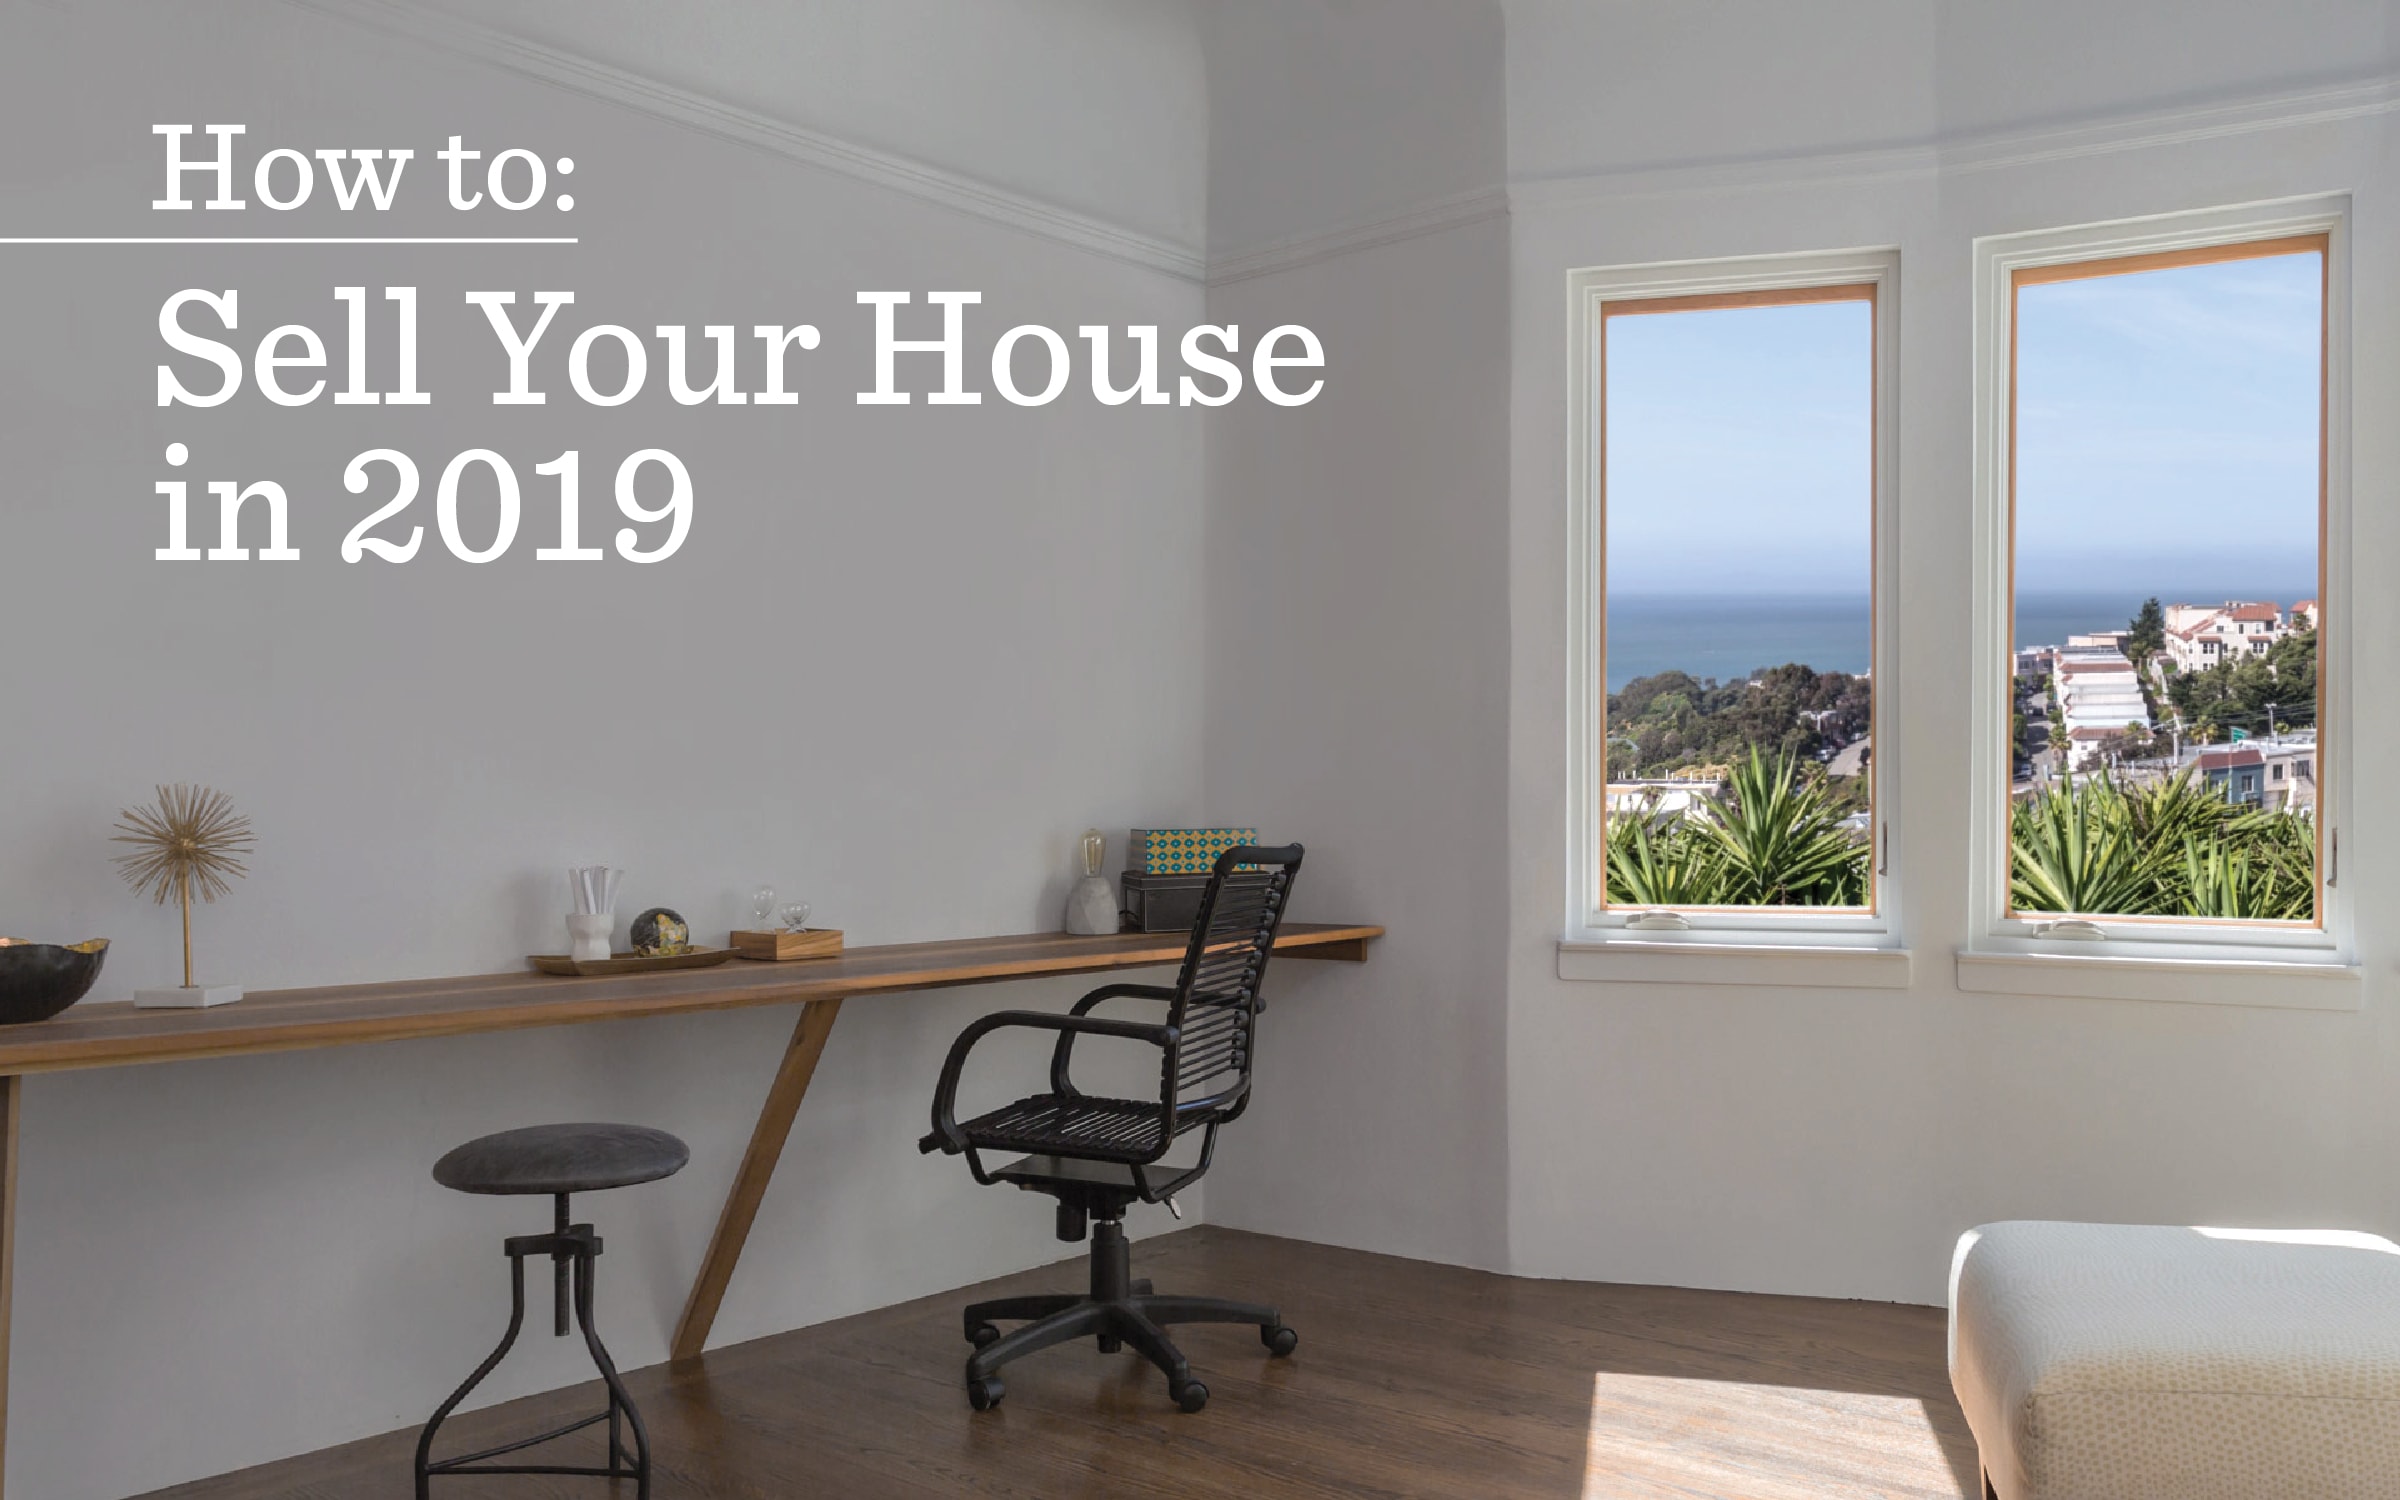 Interior view of home - How to sell you house in 2019